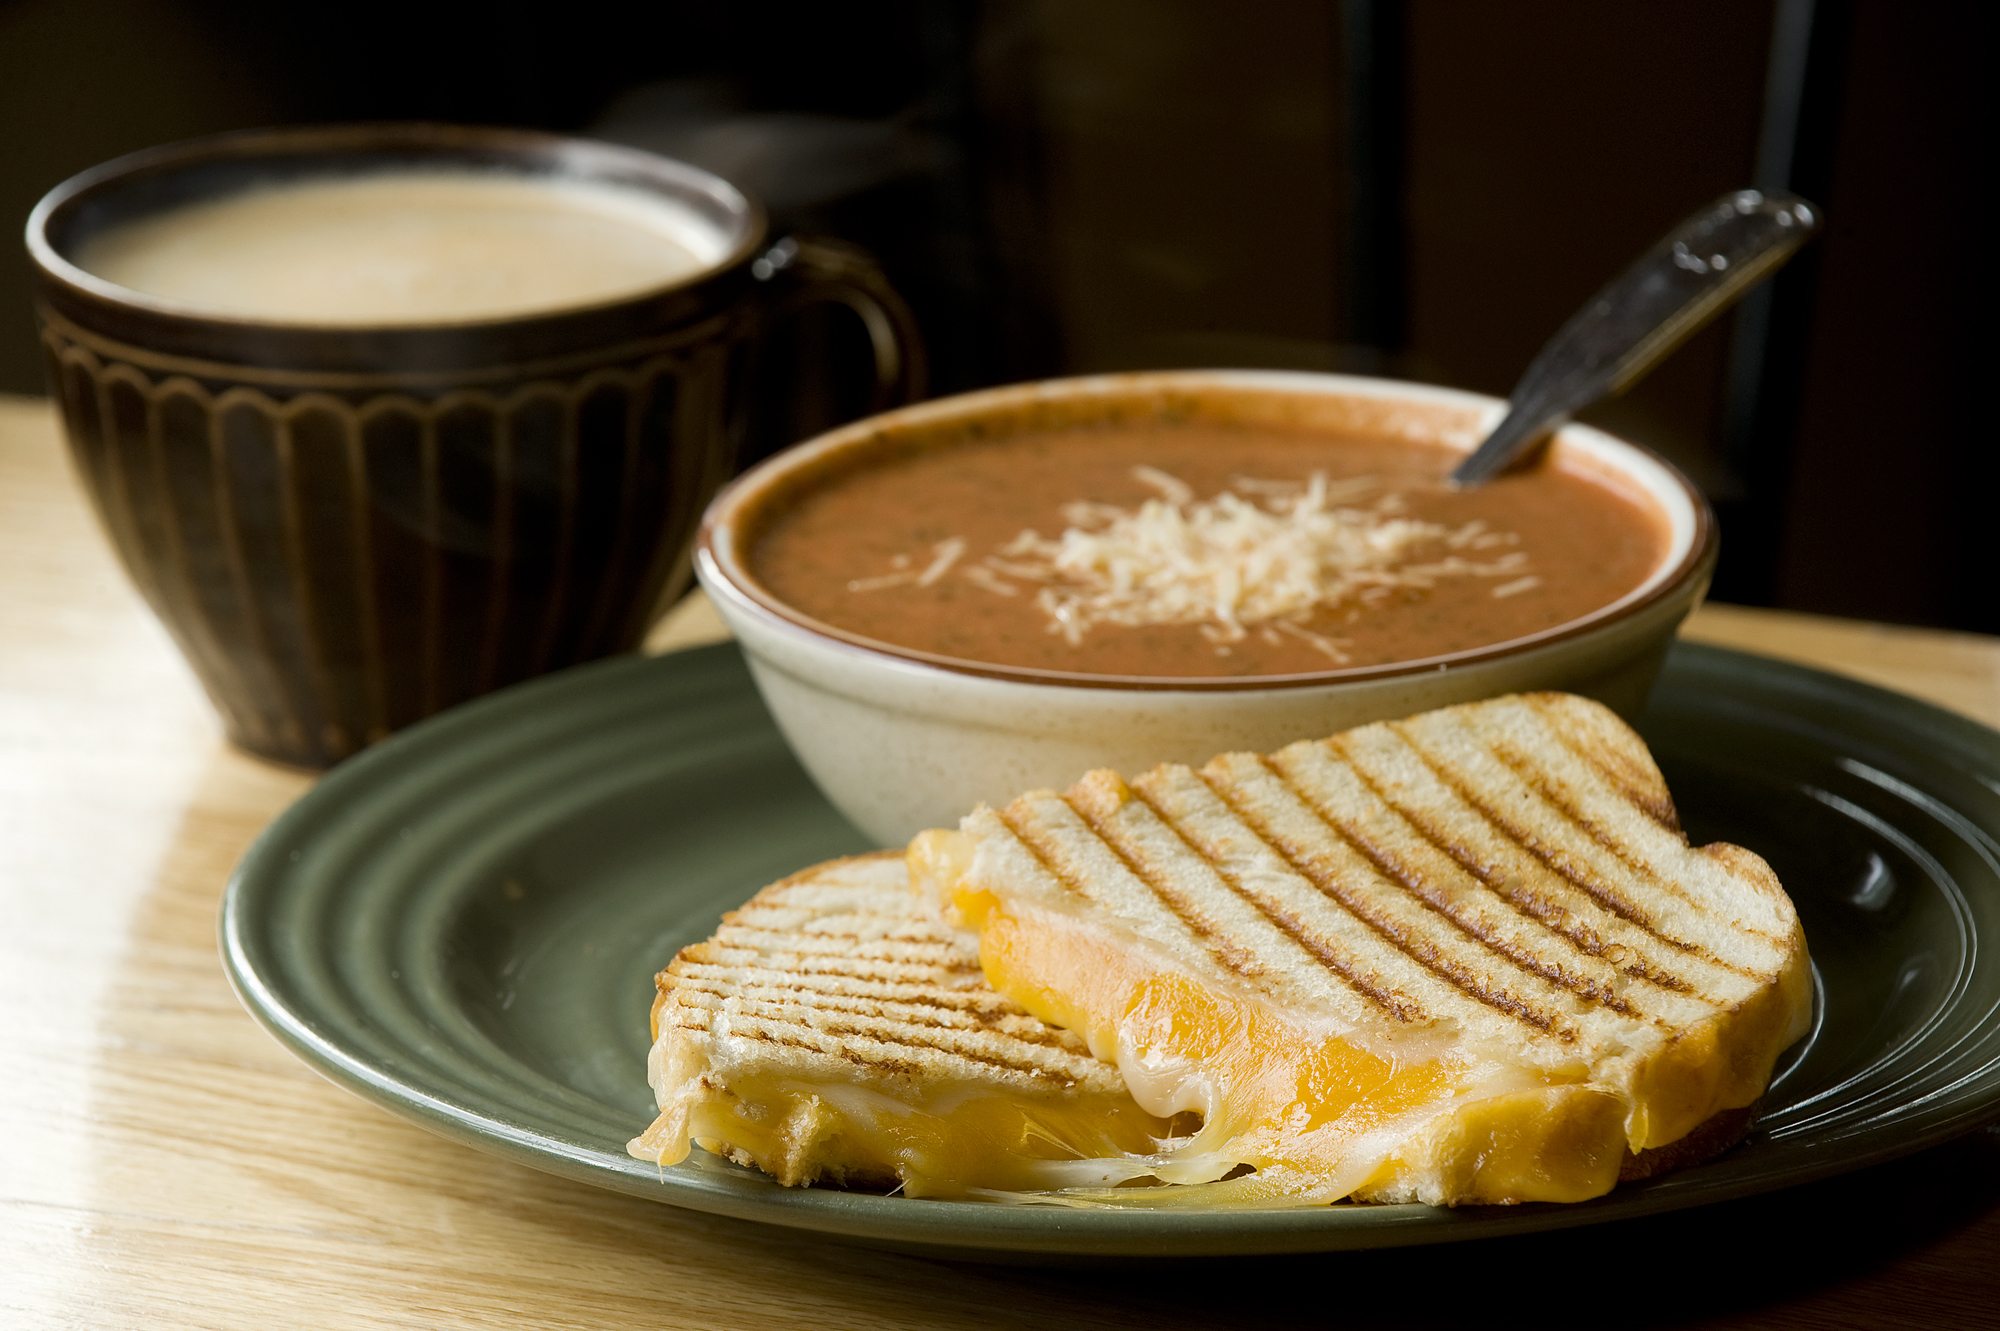 Grilled cheese sandwich, tomato bisque soup and coffee are among the many offerings at the Rosemary Cafe.